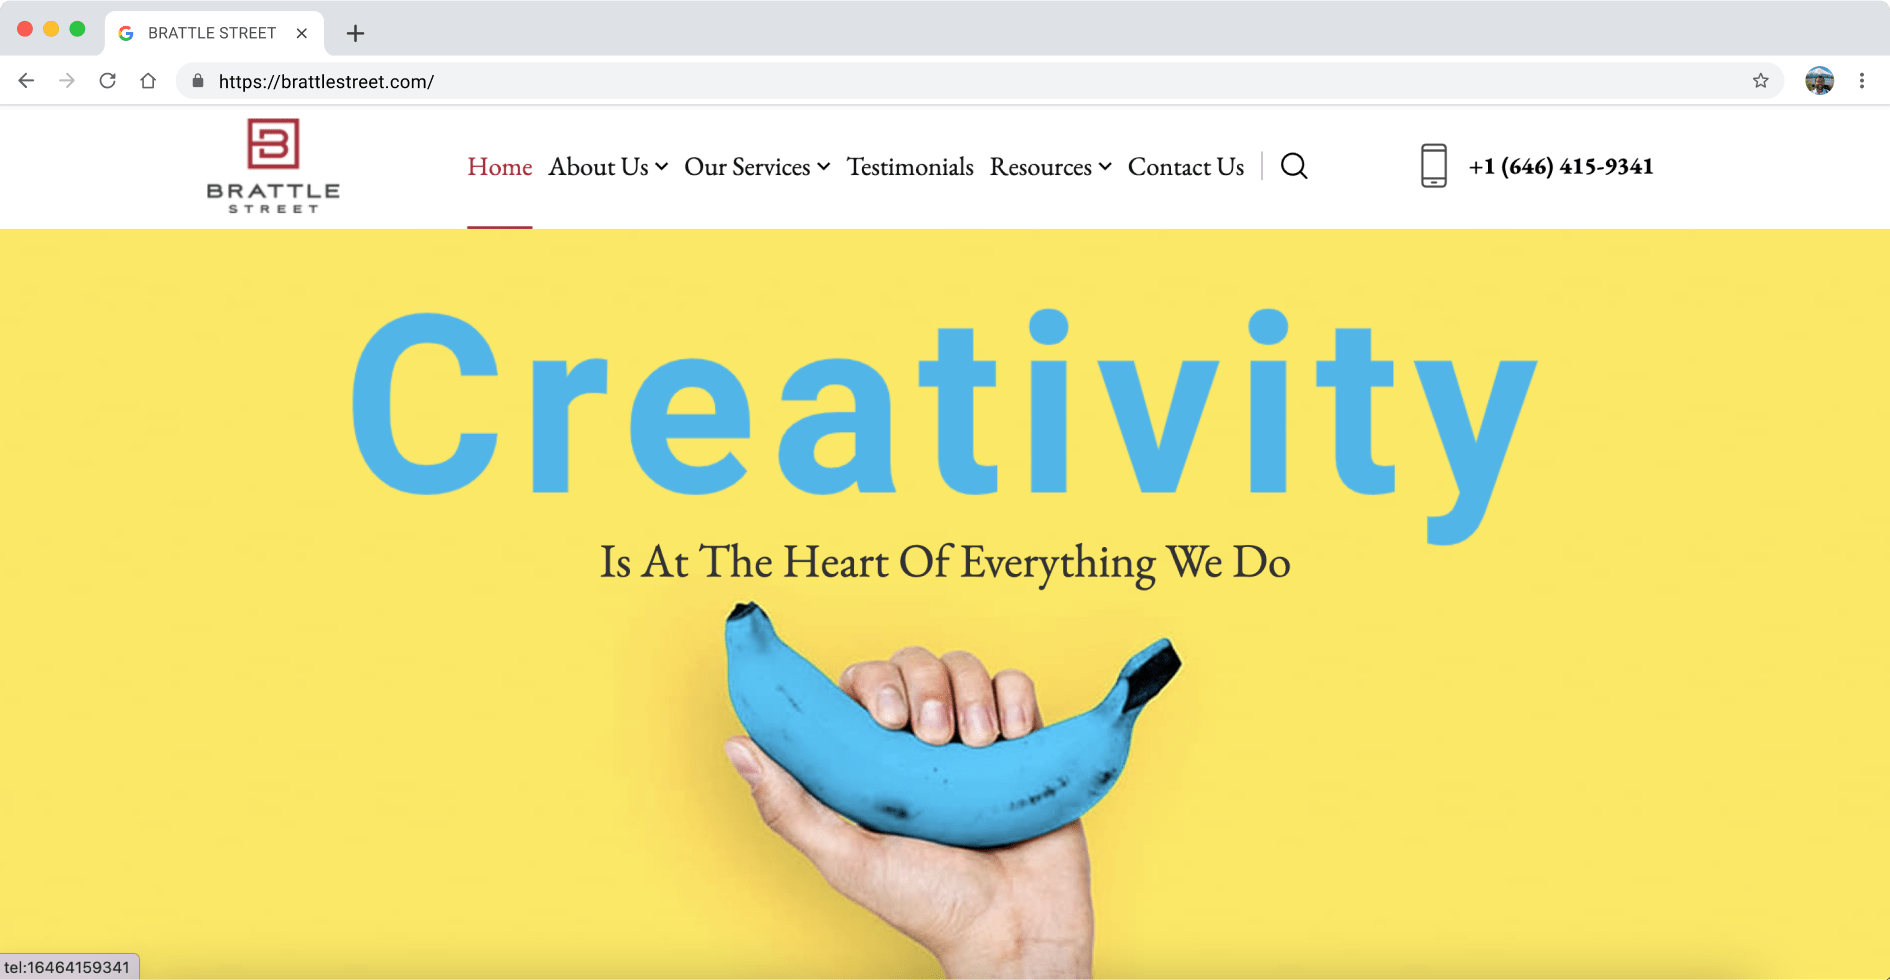 Example of blue and yellow color scheme application in web design, highlighting contrast and visual appeal